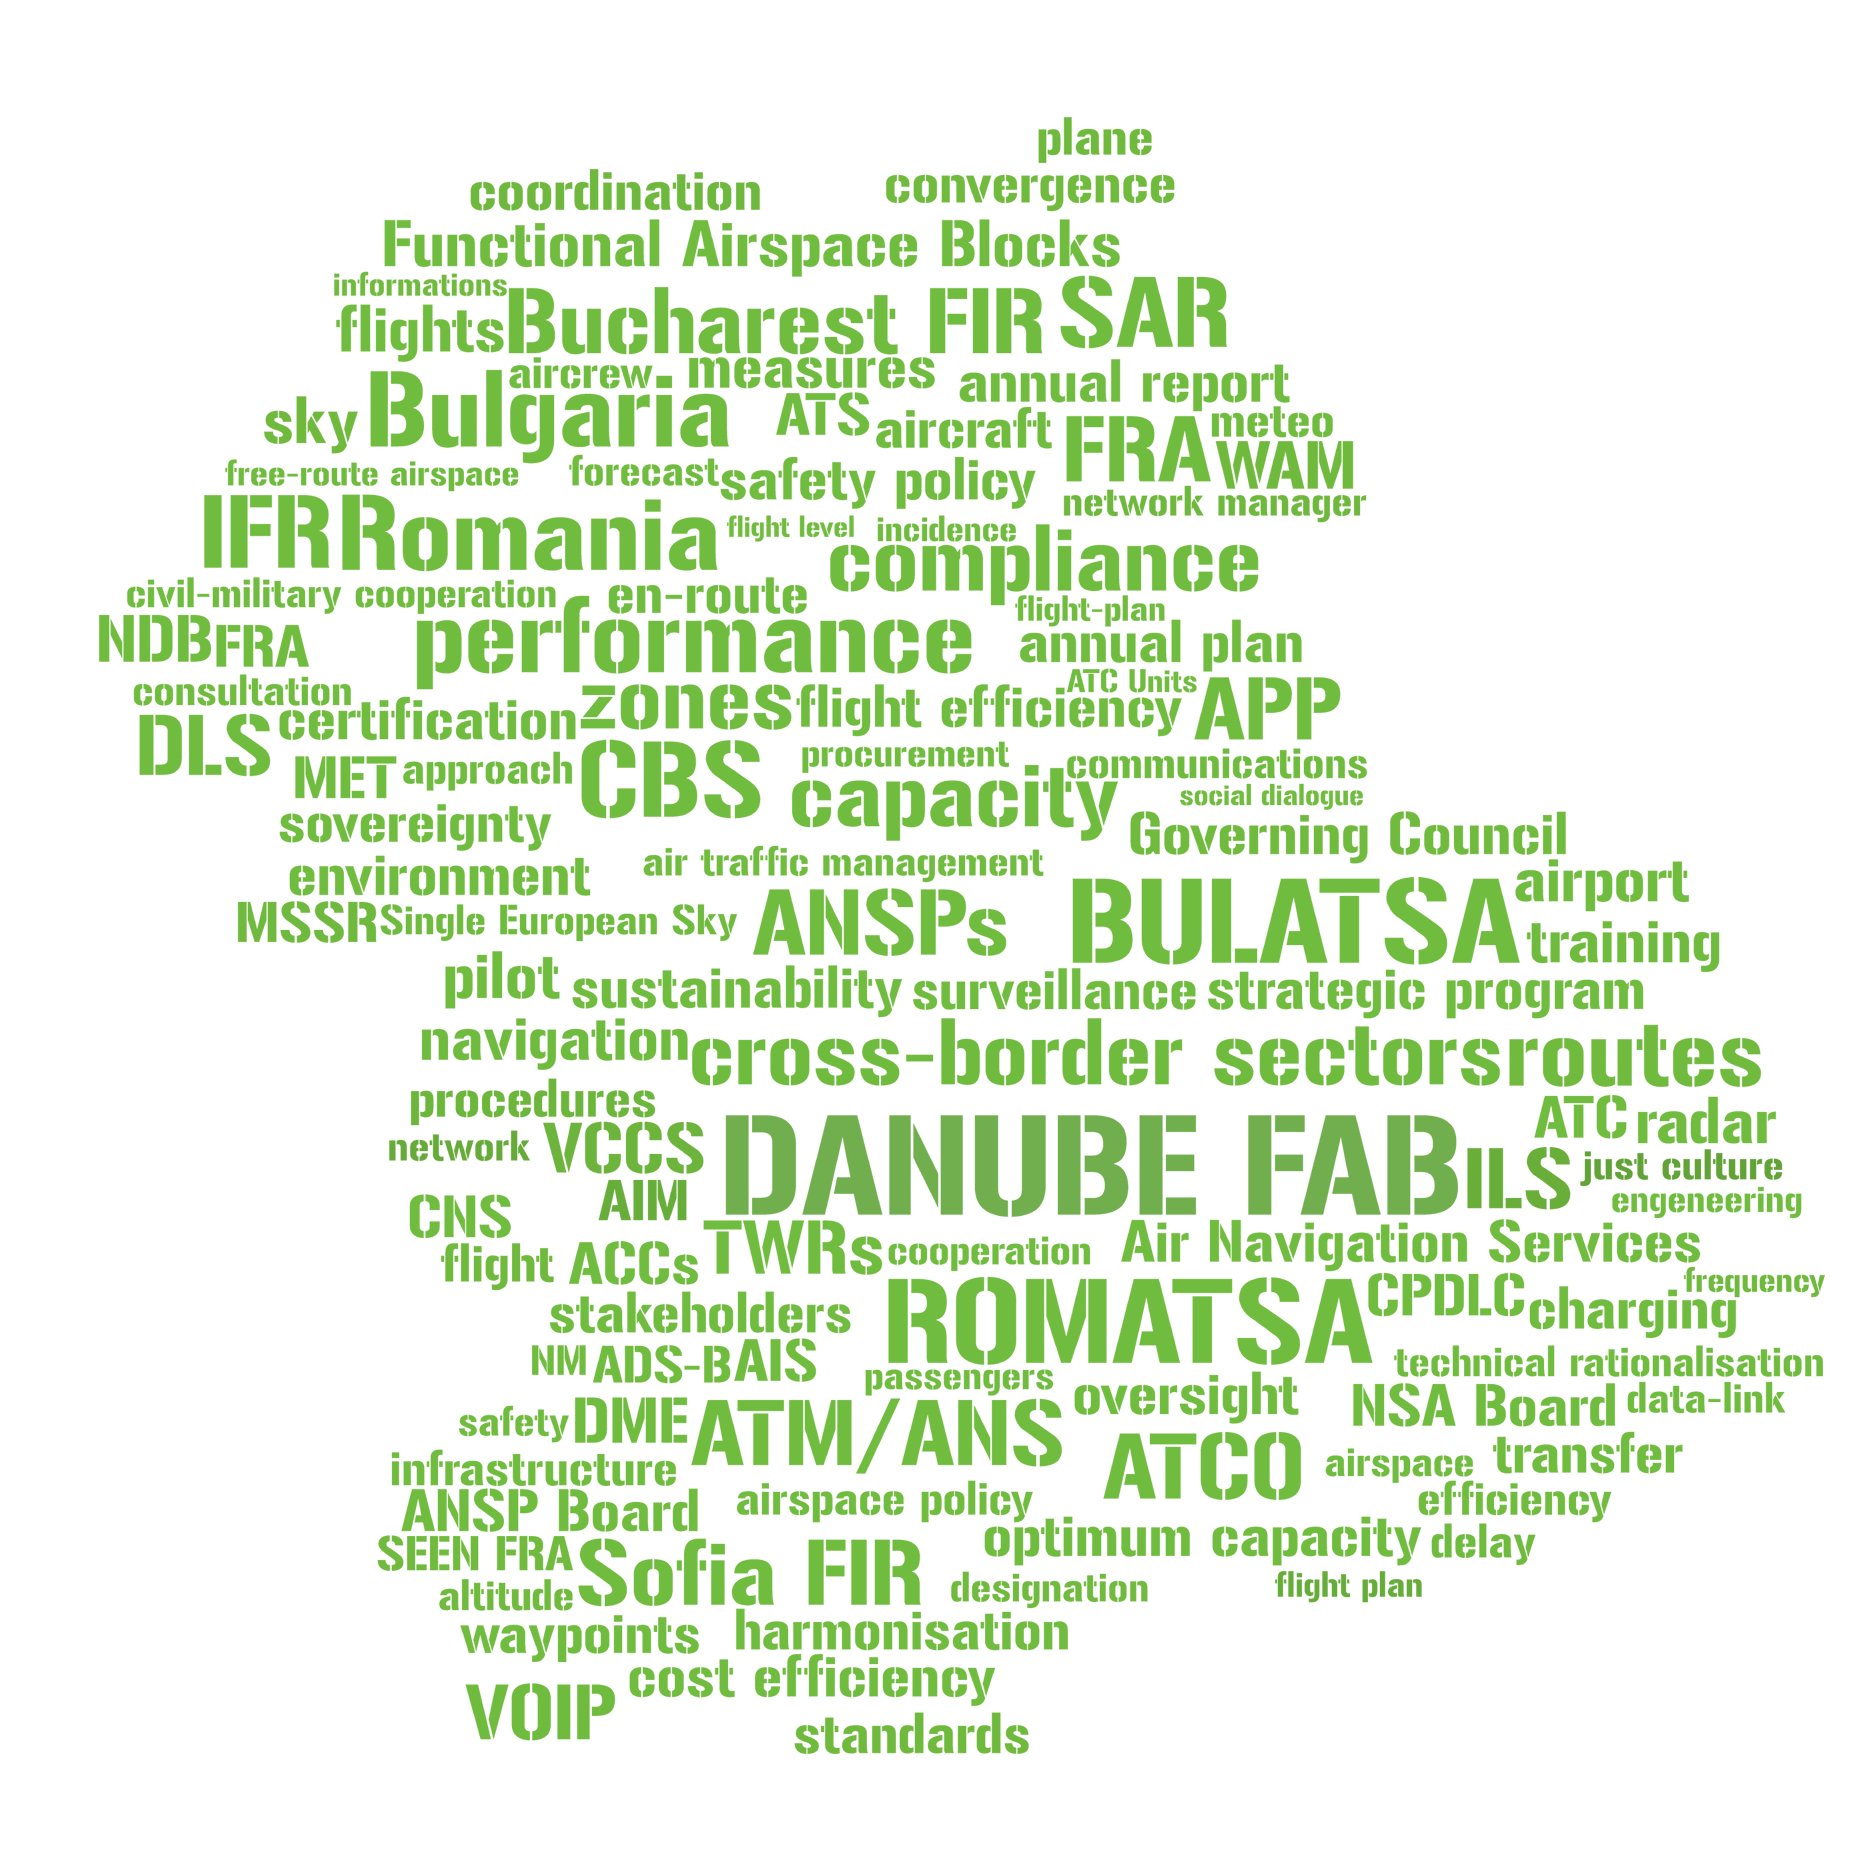 Danube FAB is a joint BG-RO project which aims to harmonise the provision of ANS, delivering enhanced efficiency and reducing costs for airspace users.